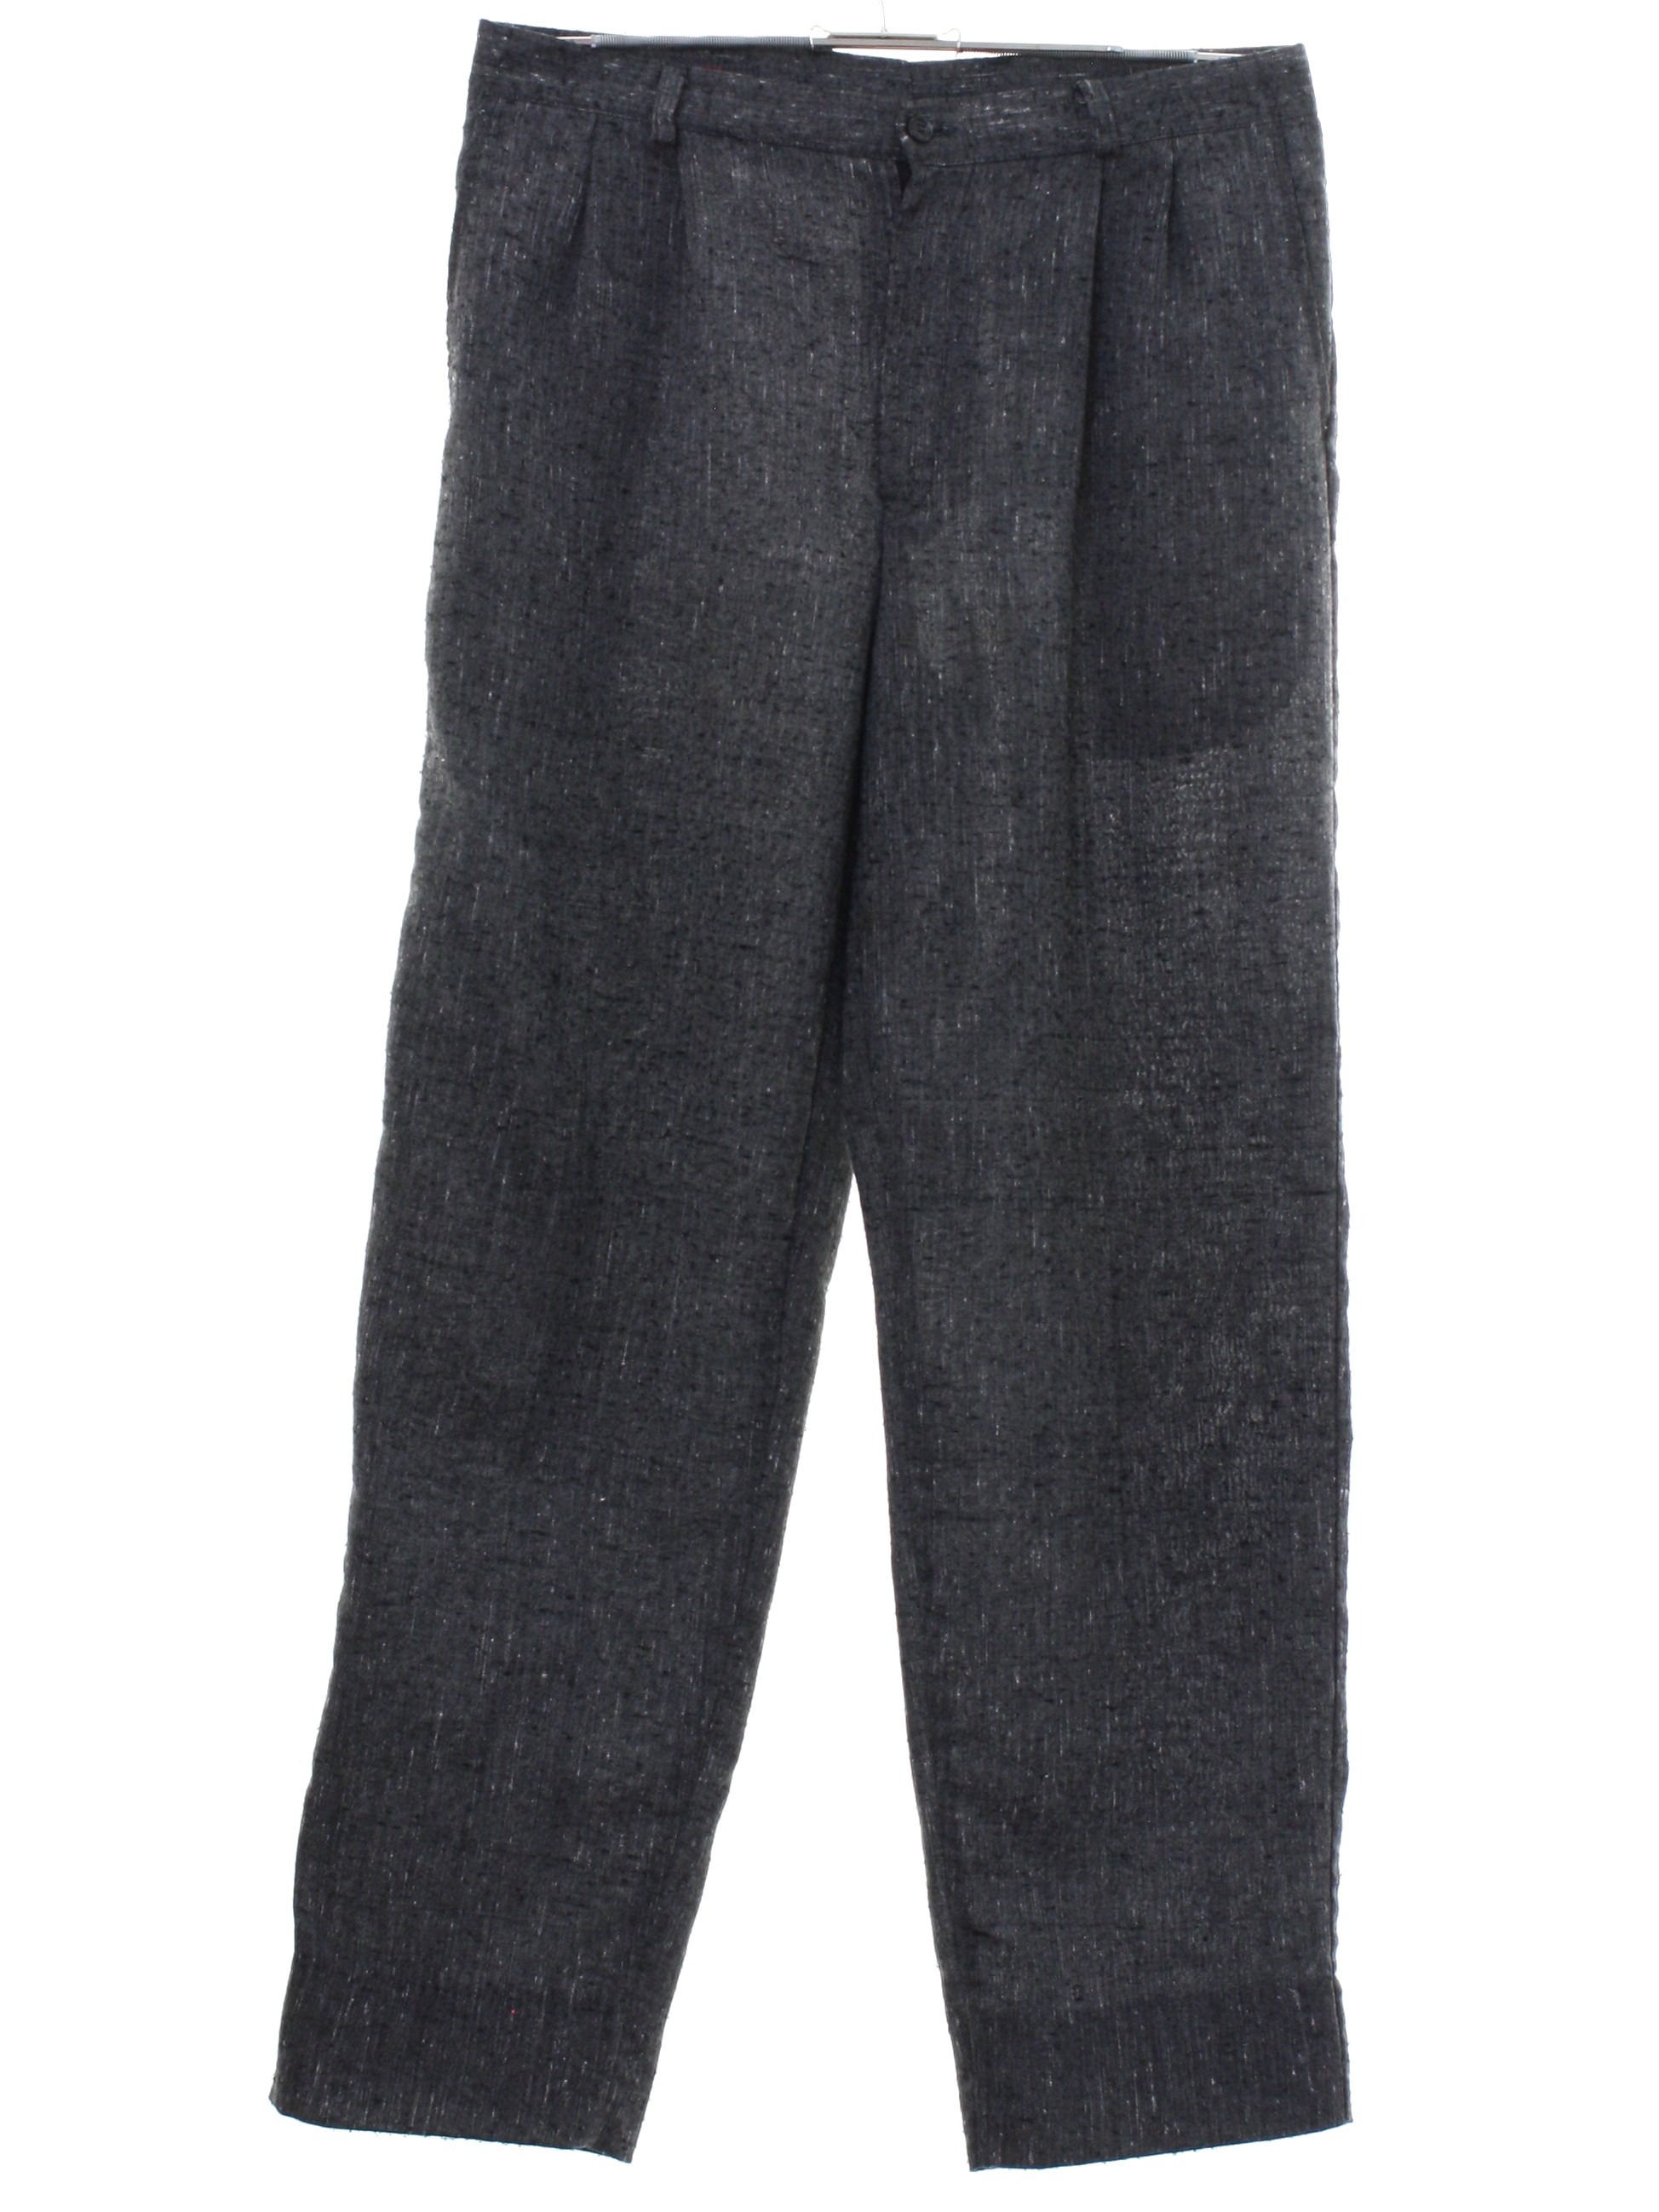 80s Pants (RPM): 80s -RPM- Mens heather charcoal gray background with ...